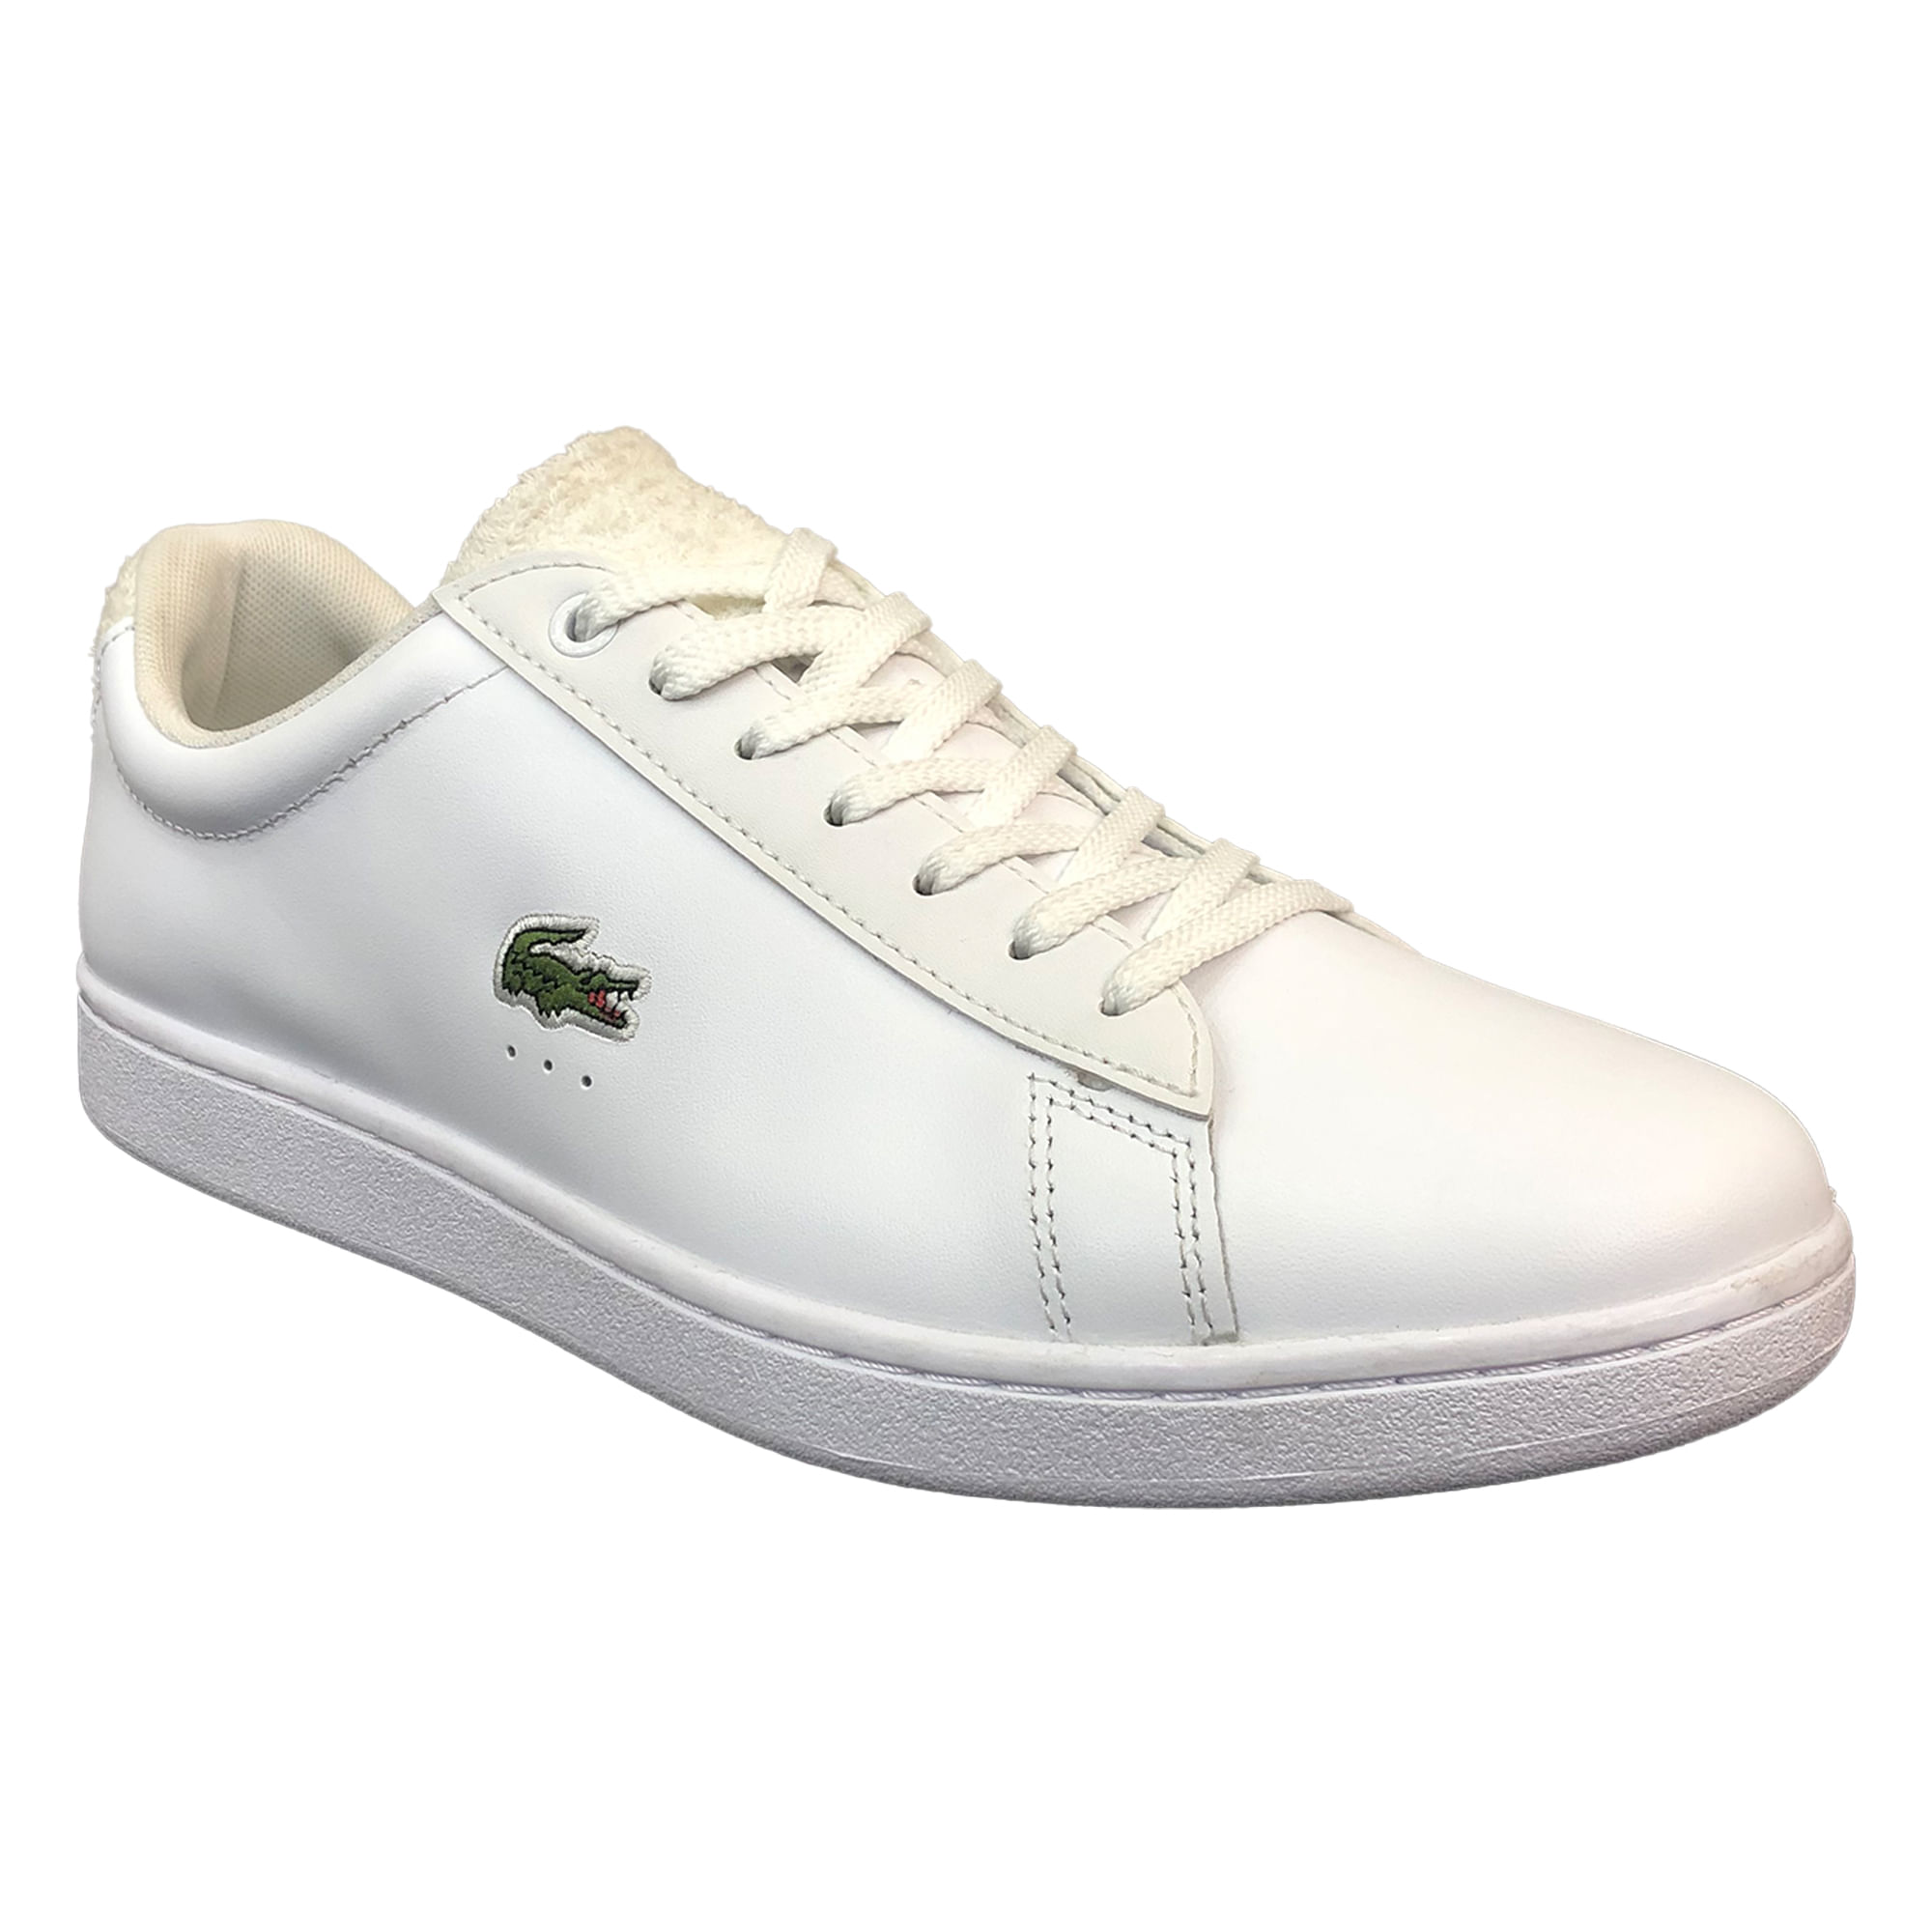 Tenis Para Hombre Lacoste Carnaby evo 119 peopleplays